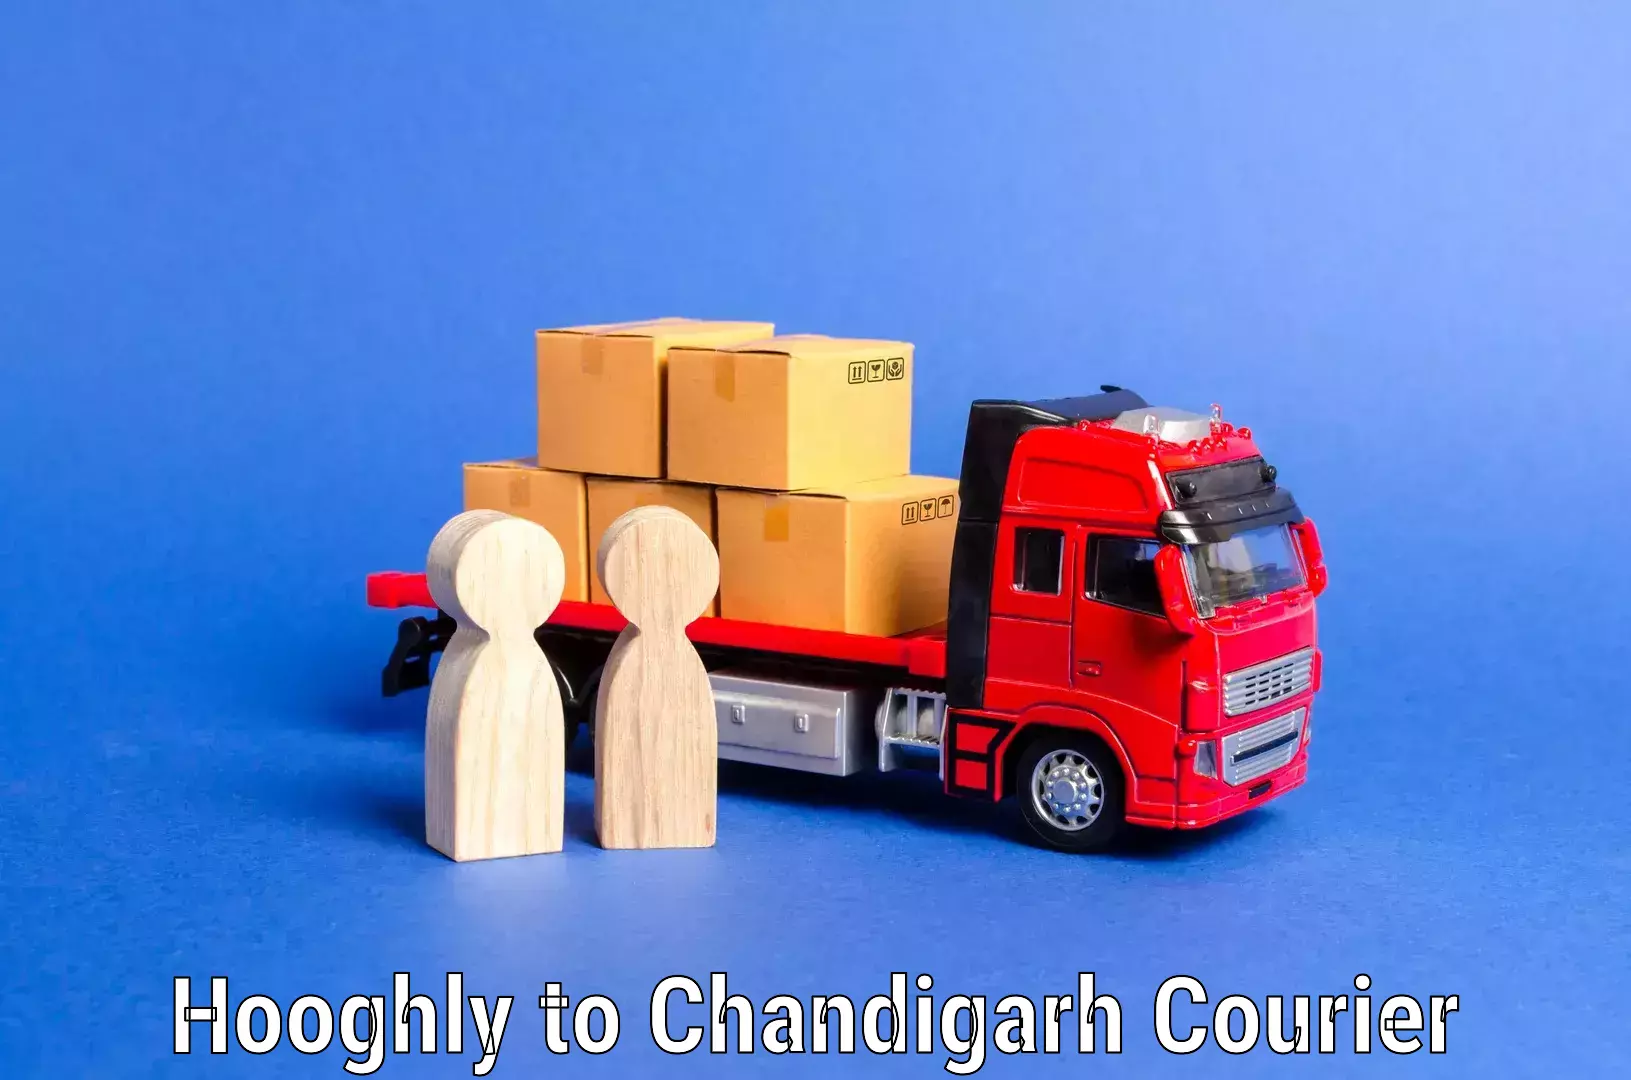 Quality relocation assistance Hooghly to Chandigarh